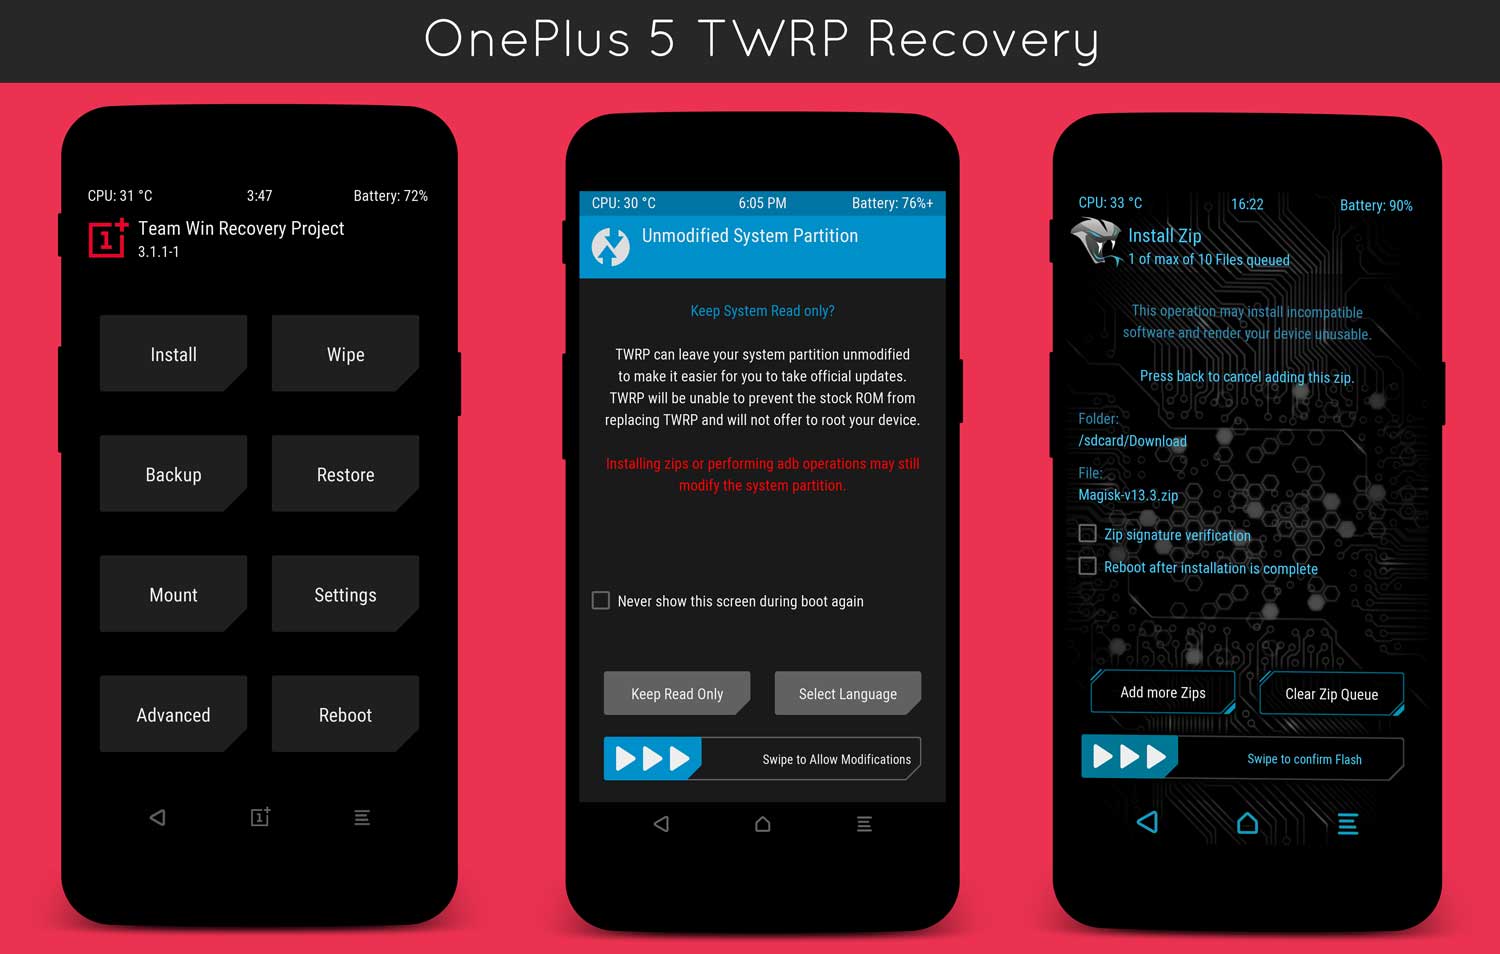 How to install TWRP Recovery in OnePlus 5